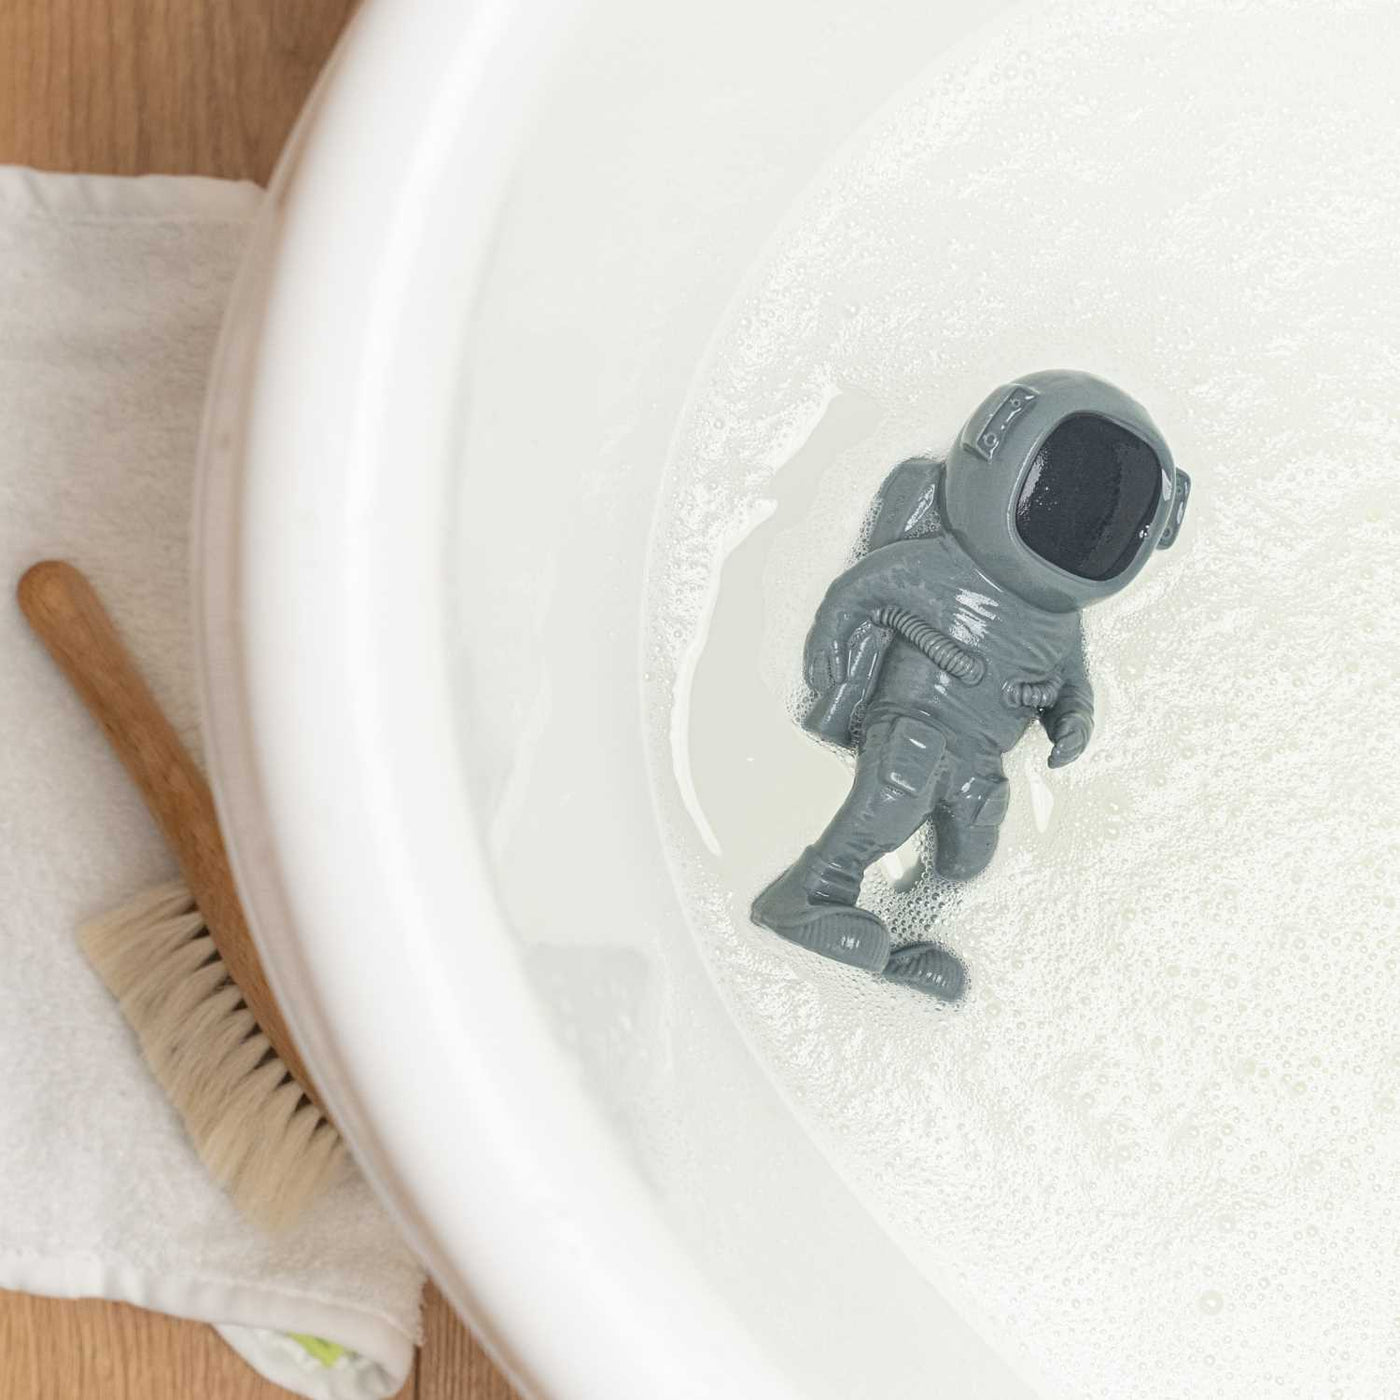 AstroGNAW astronaut natural rubber bath toy